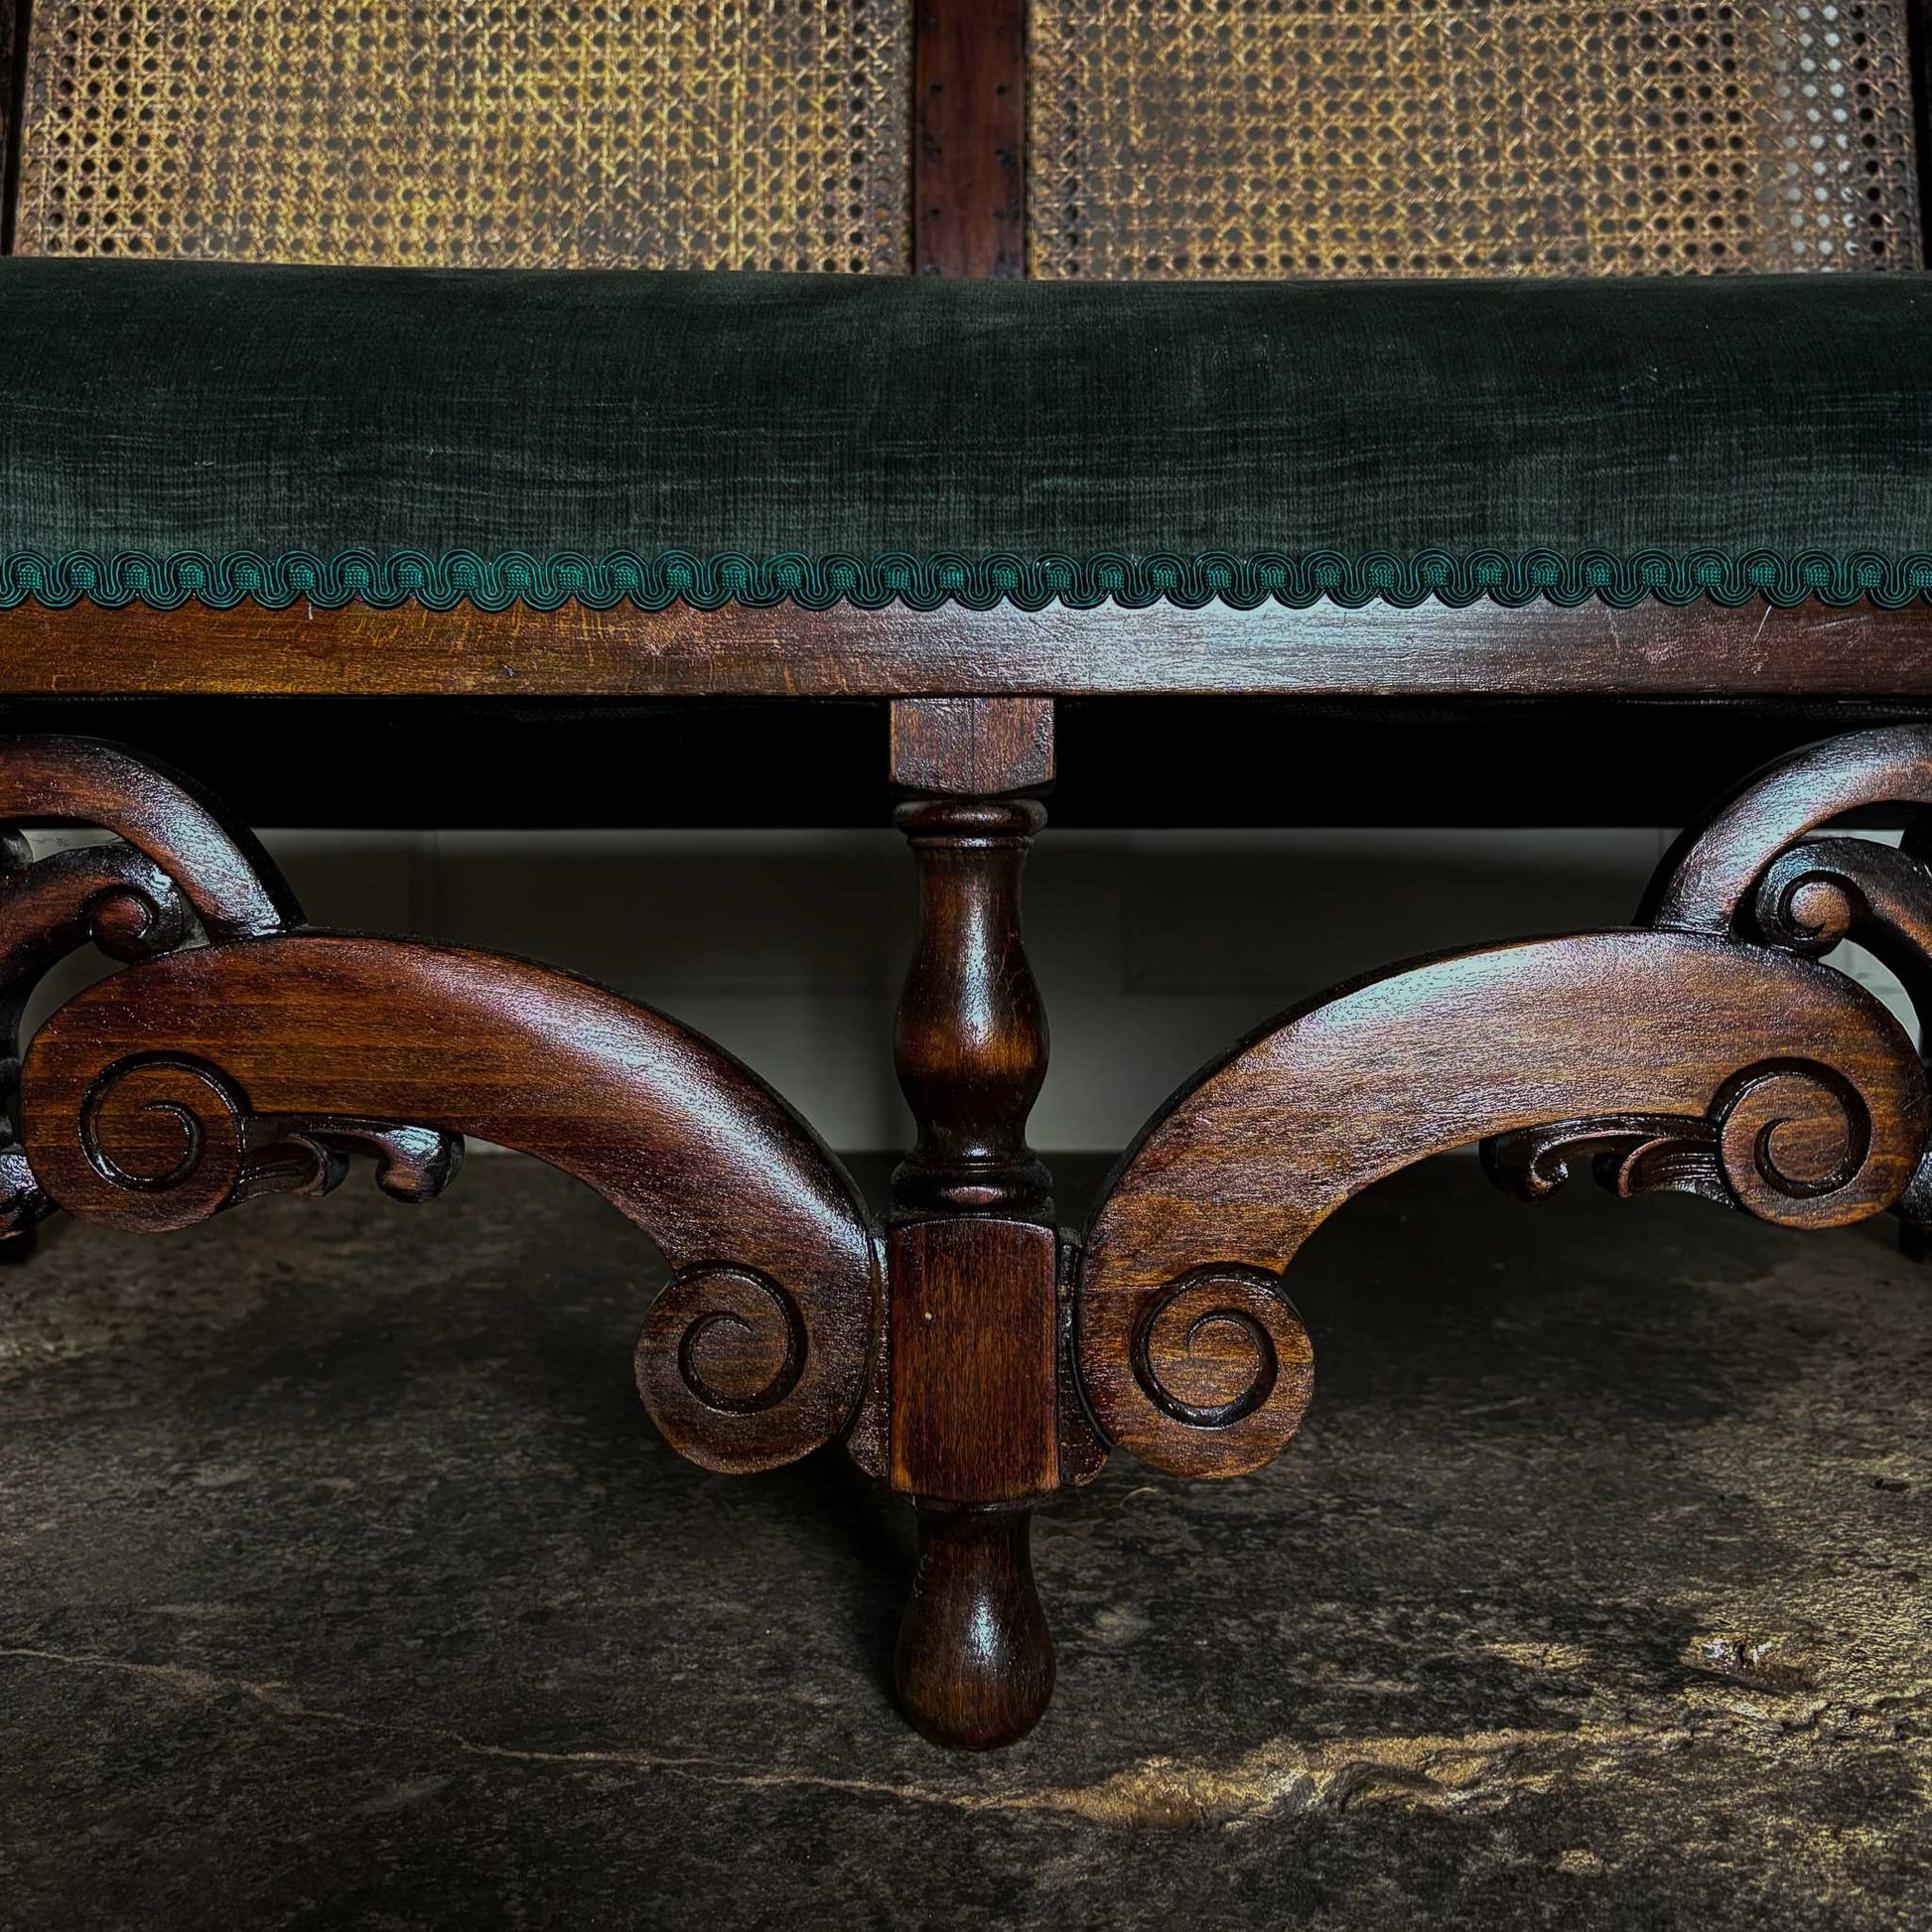 An elegant two seater 19th century settee with a two part cane panelled backrest, newly reupholstered in a dark green velvet and matching green braiding. Masterfully restored by Anthony Beech ACR and in excellent structural condition.